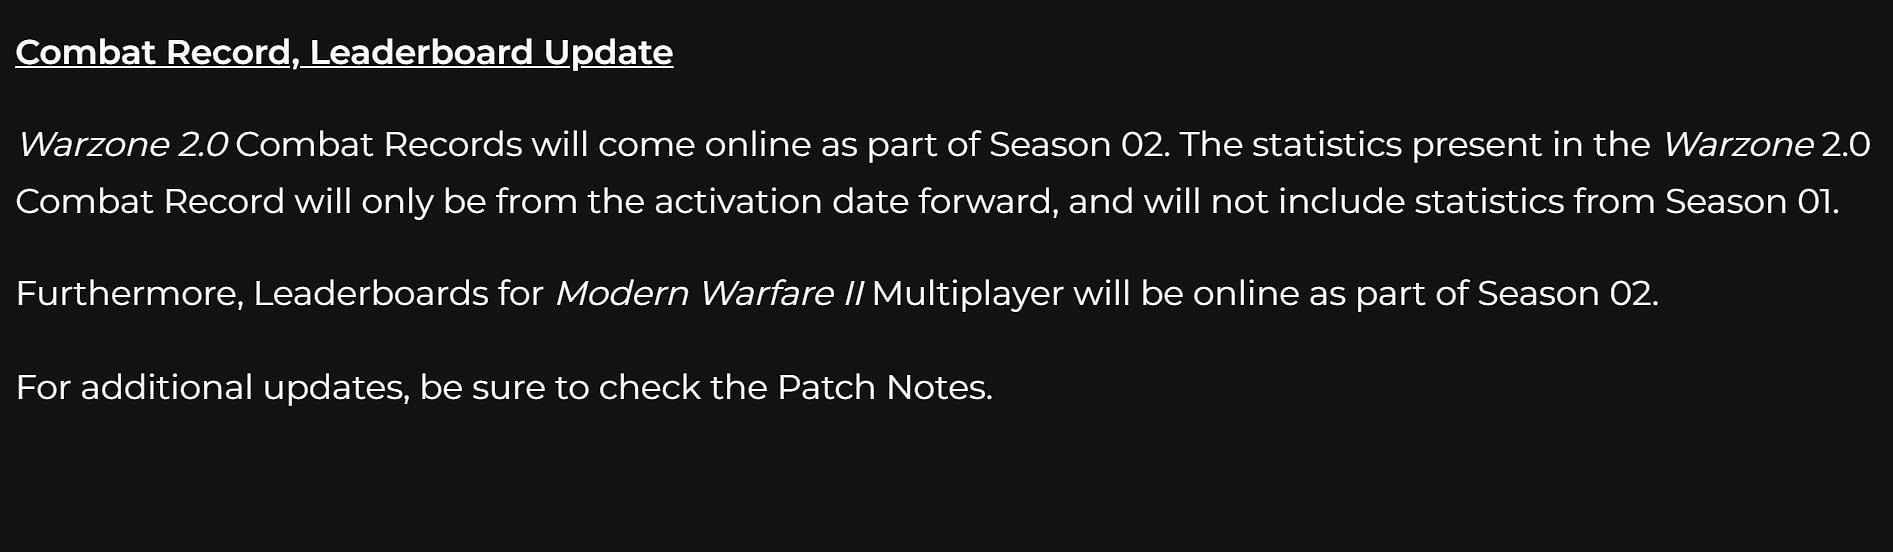 Warzone 2 Combat Records will not include statistics from Season 1